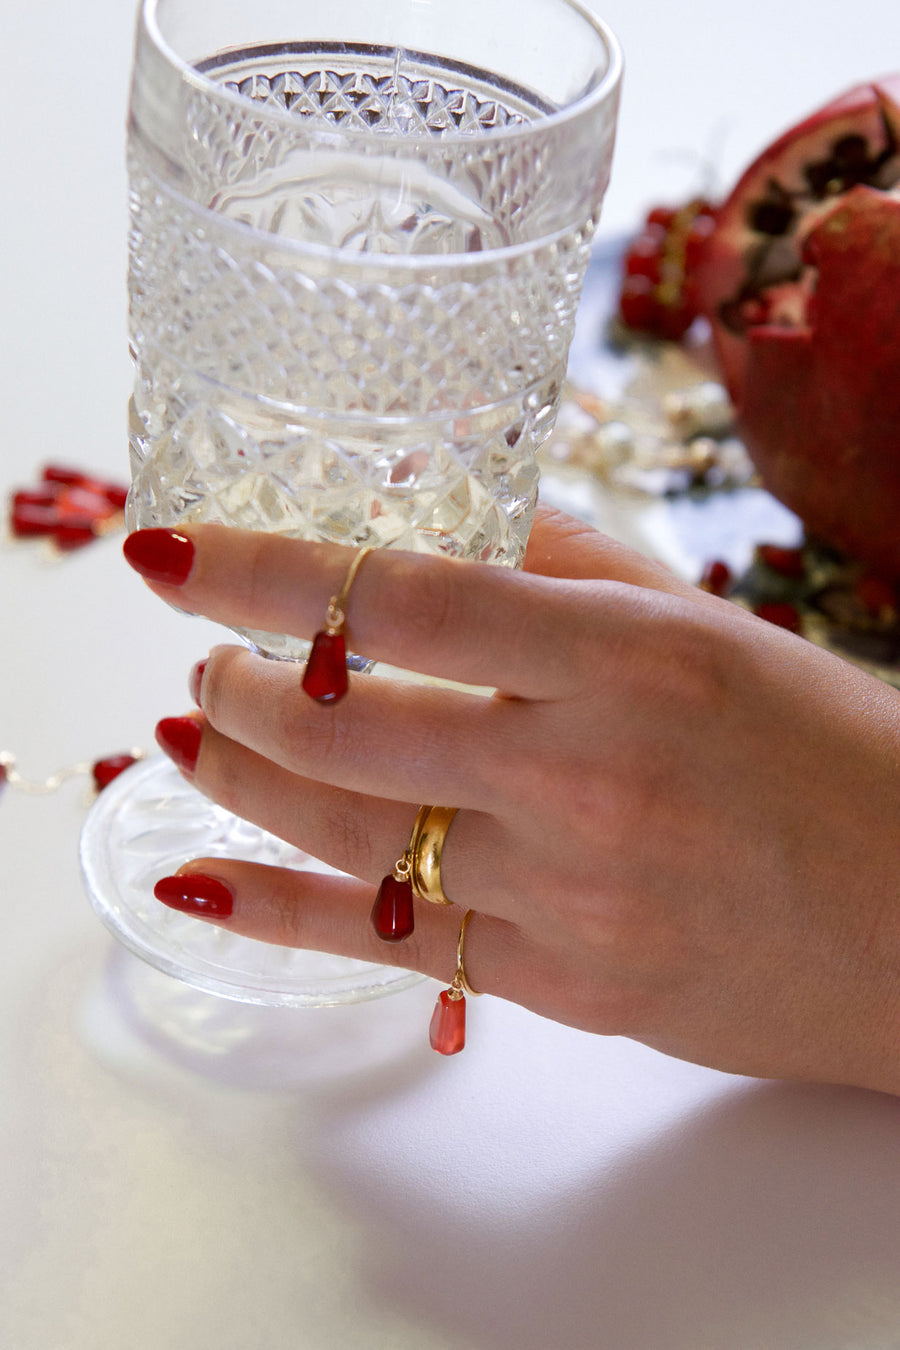 POMEGRANATE SEED Ring